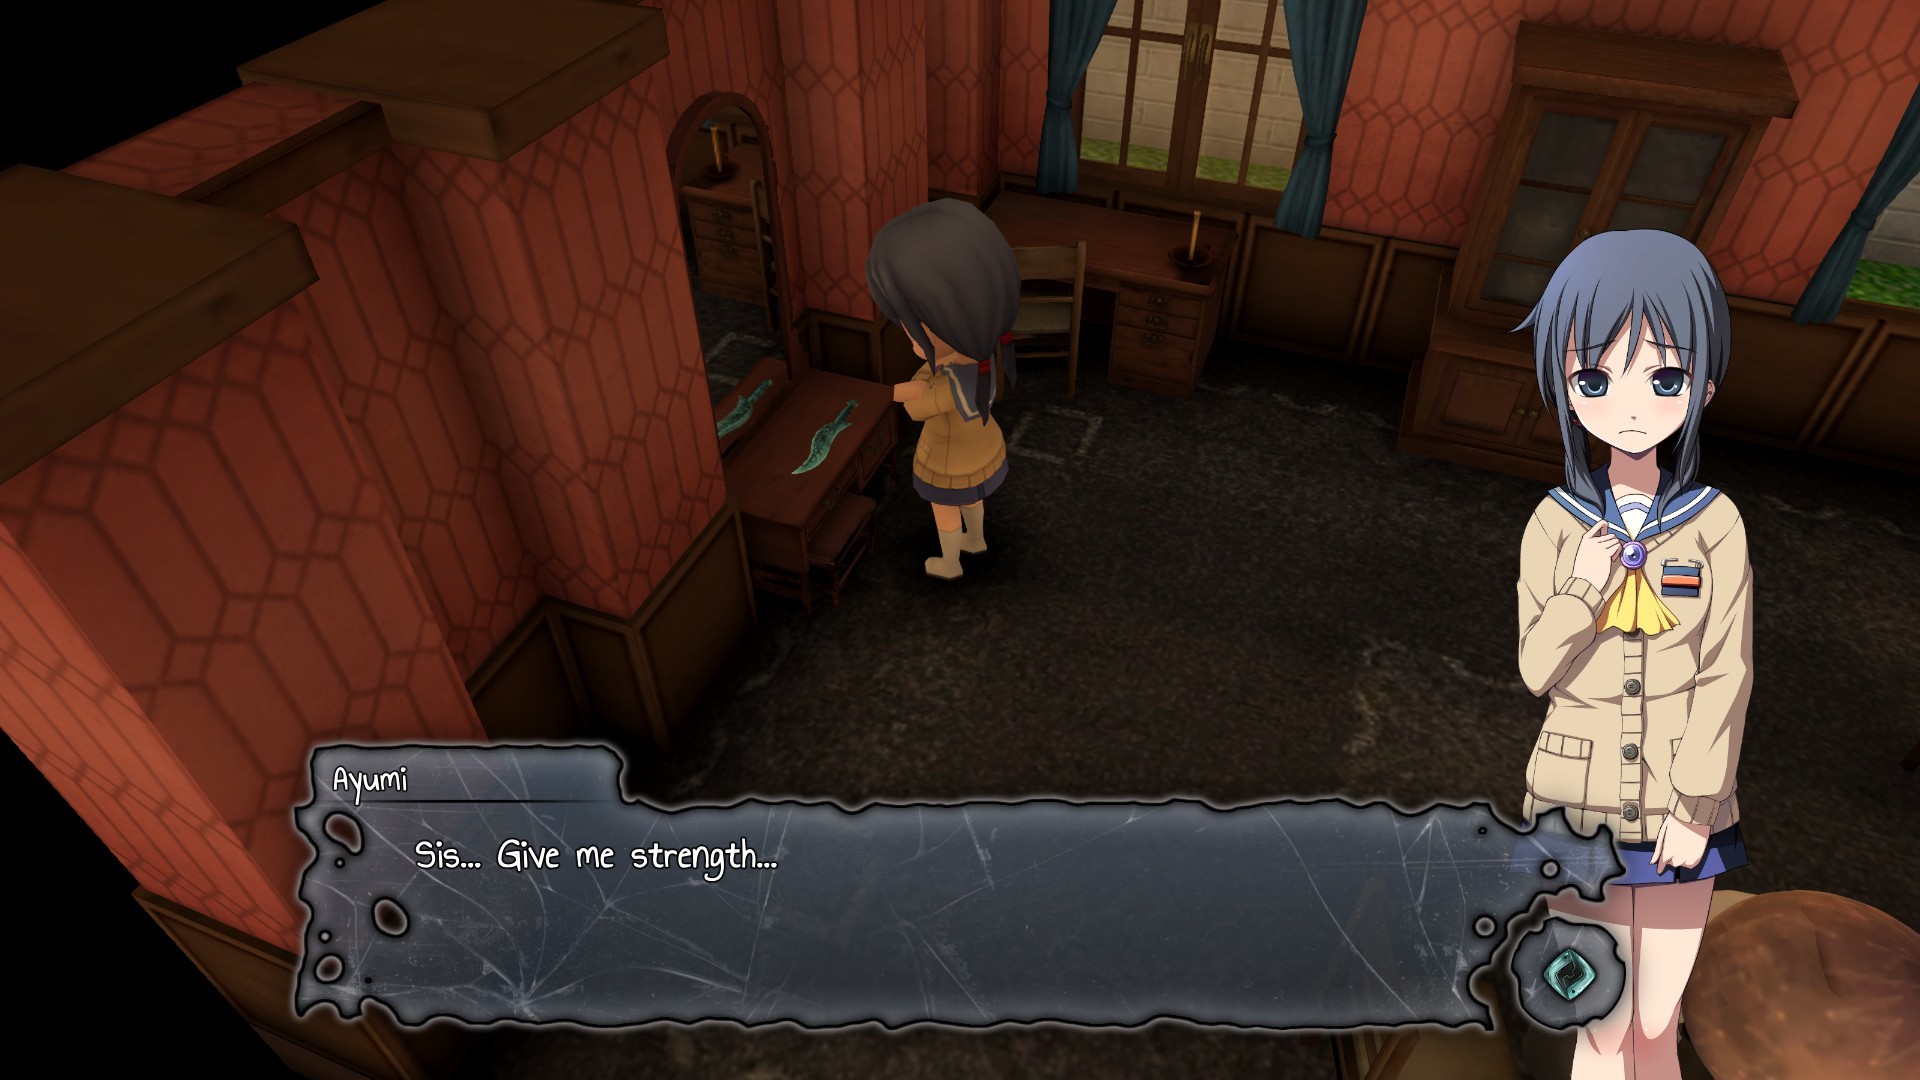 corpse party free download mac